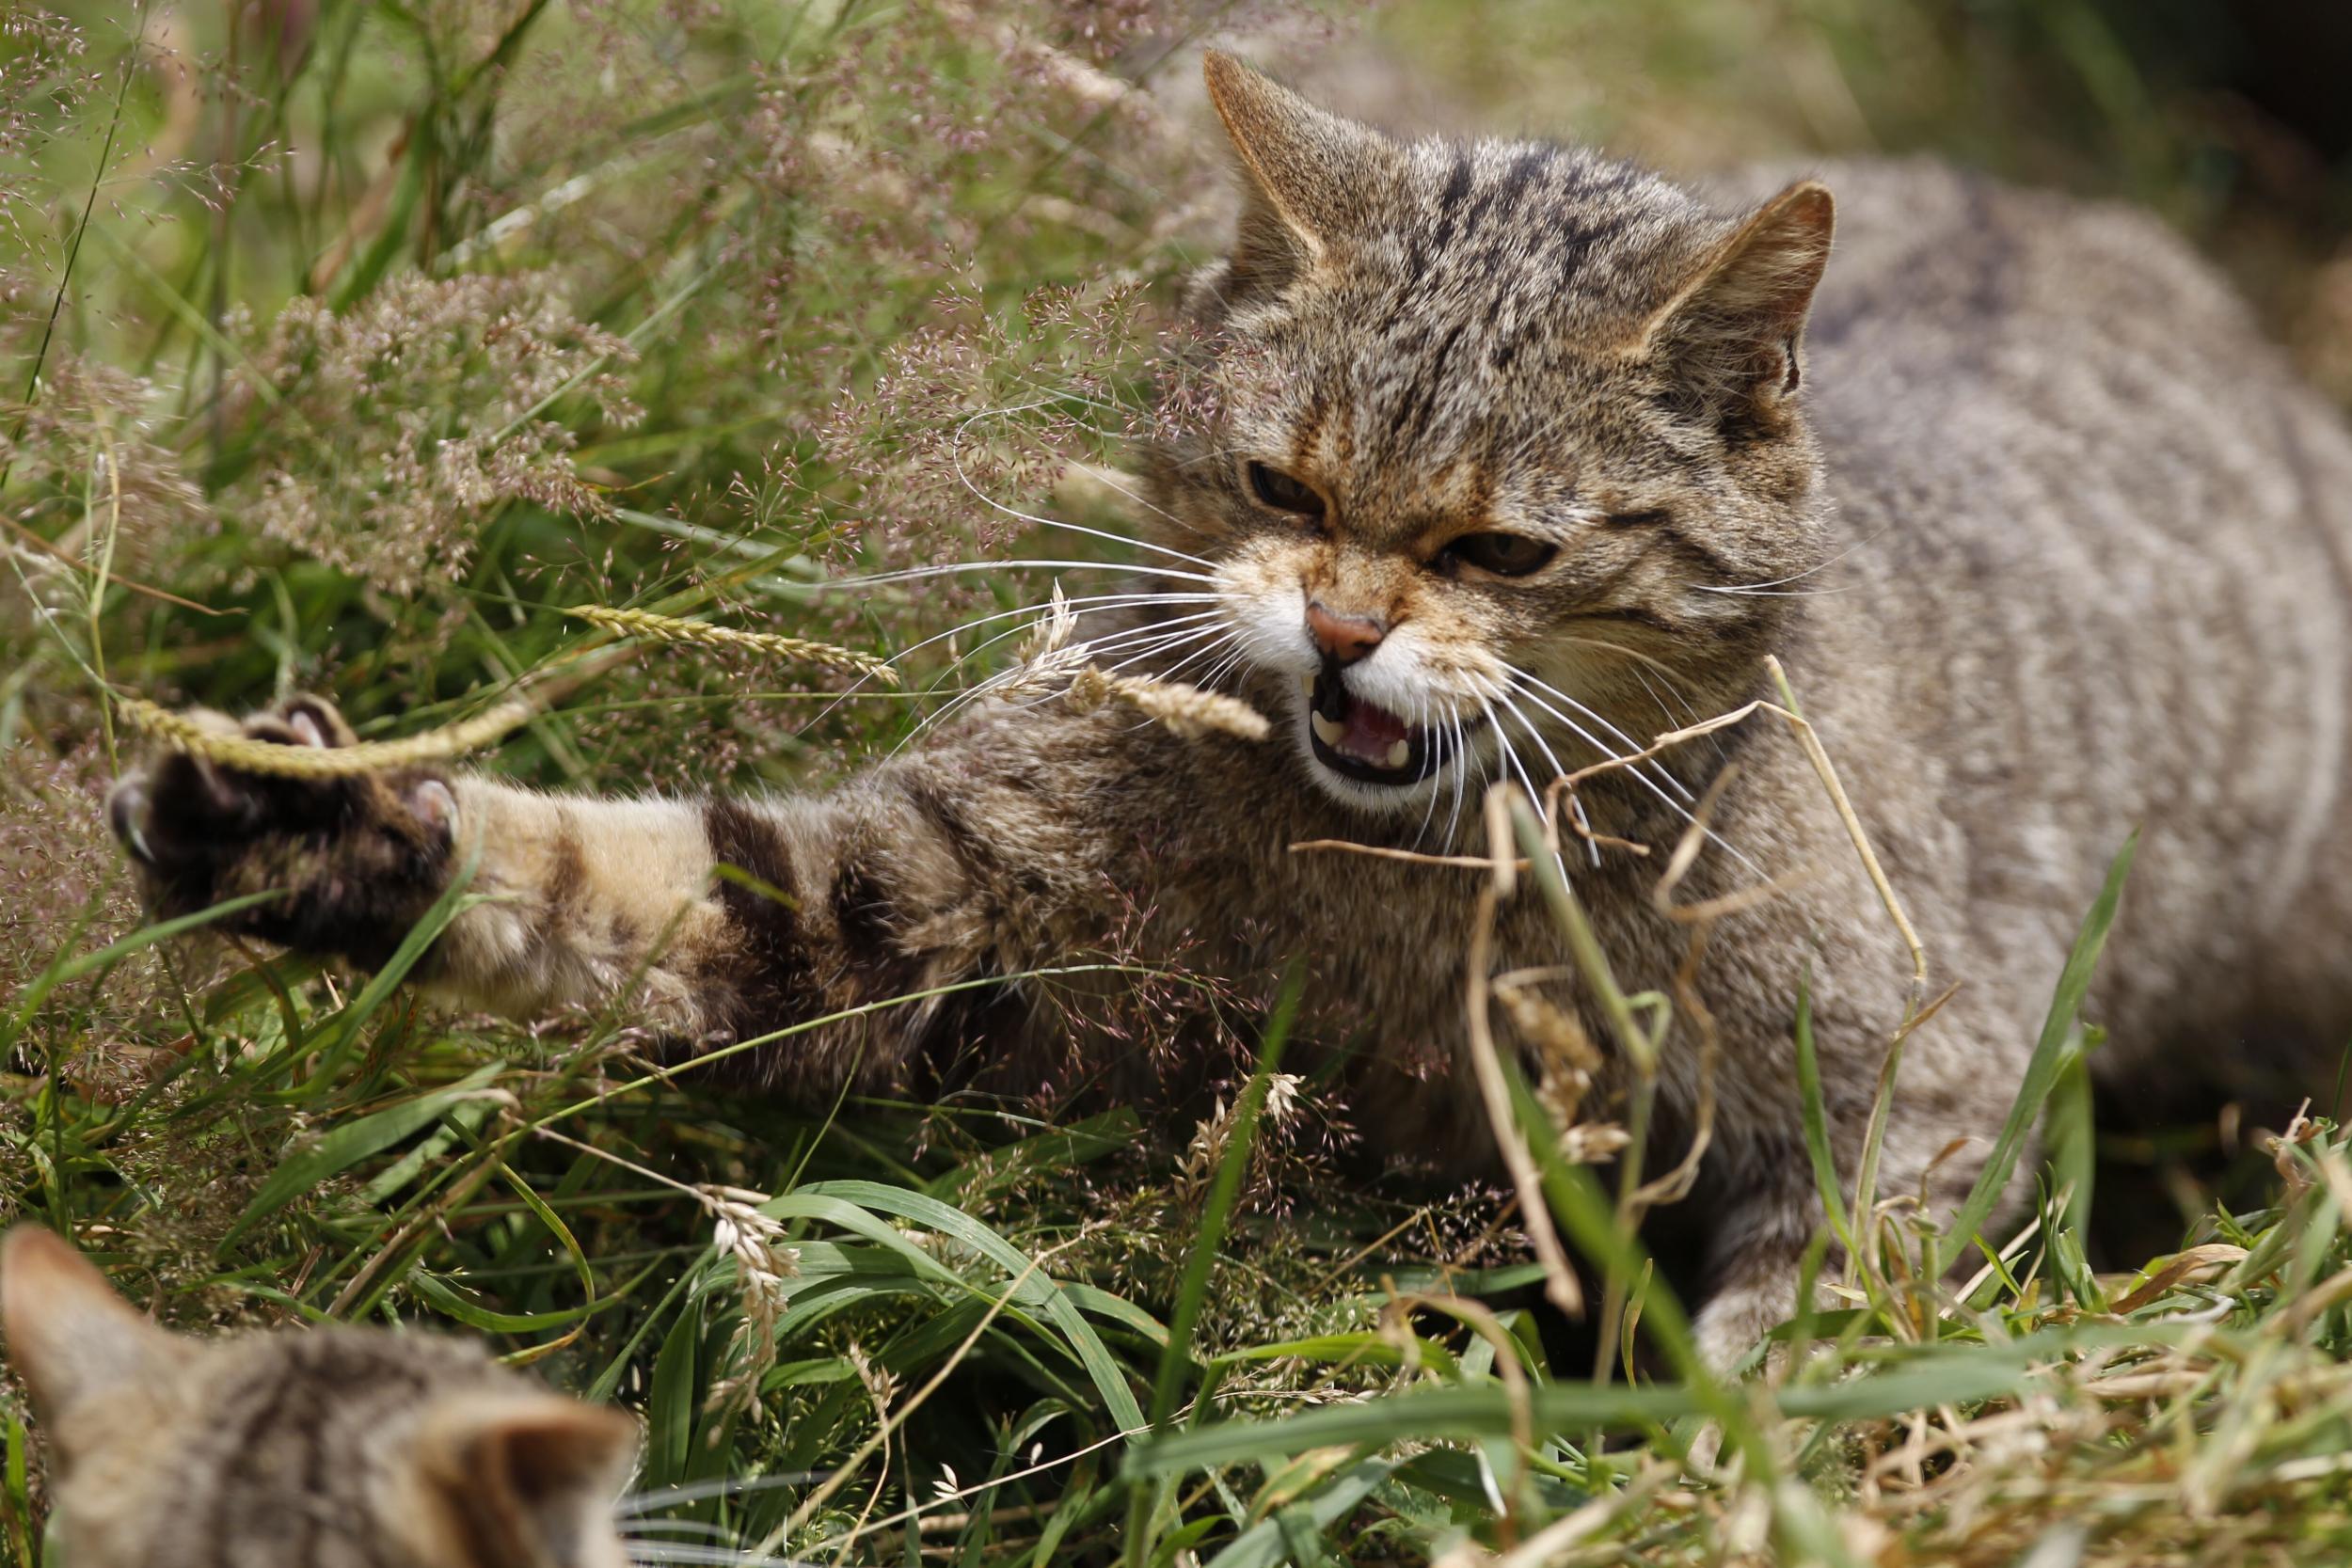 The Scottish wildcat, also known as the Highland tiger, is the only native member of the cat family still found in the wild in Britain (Bob Brind-Surch/Natures Photos)